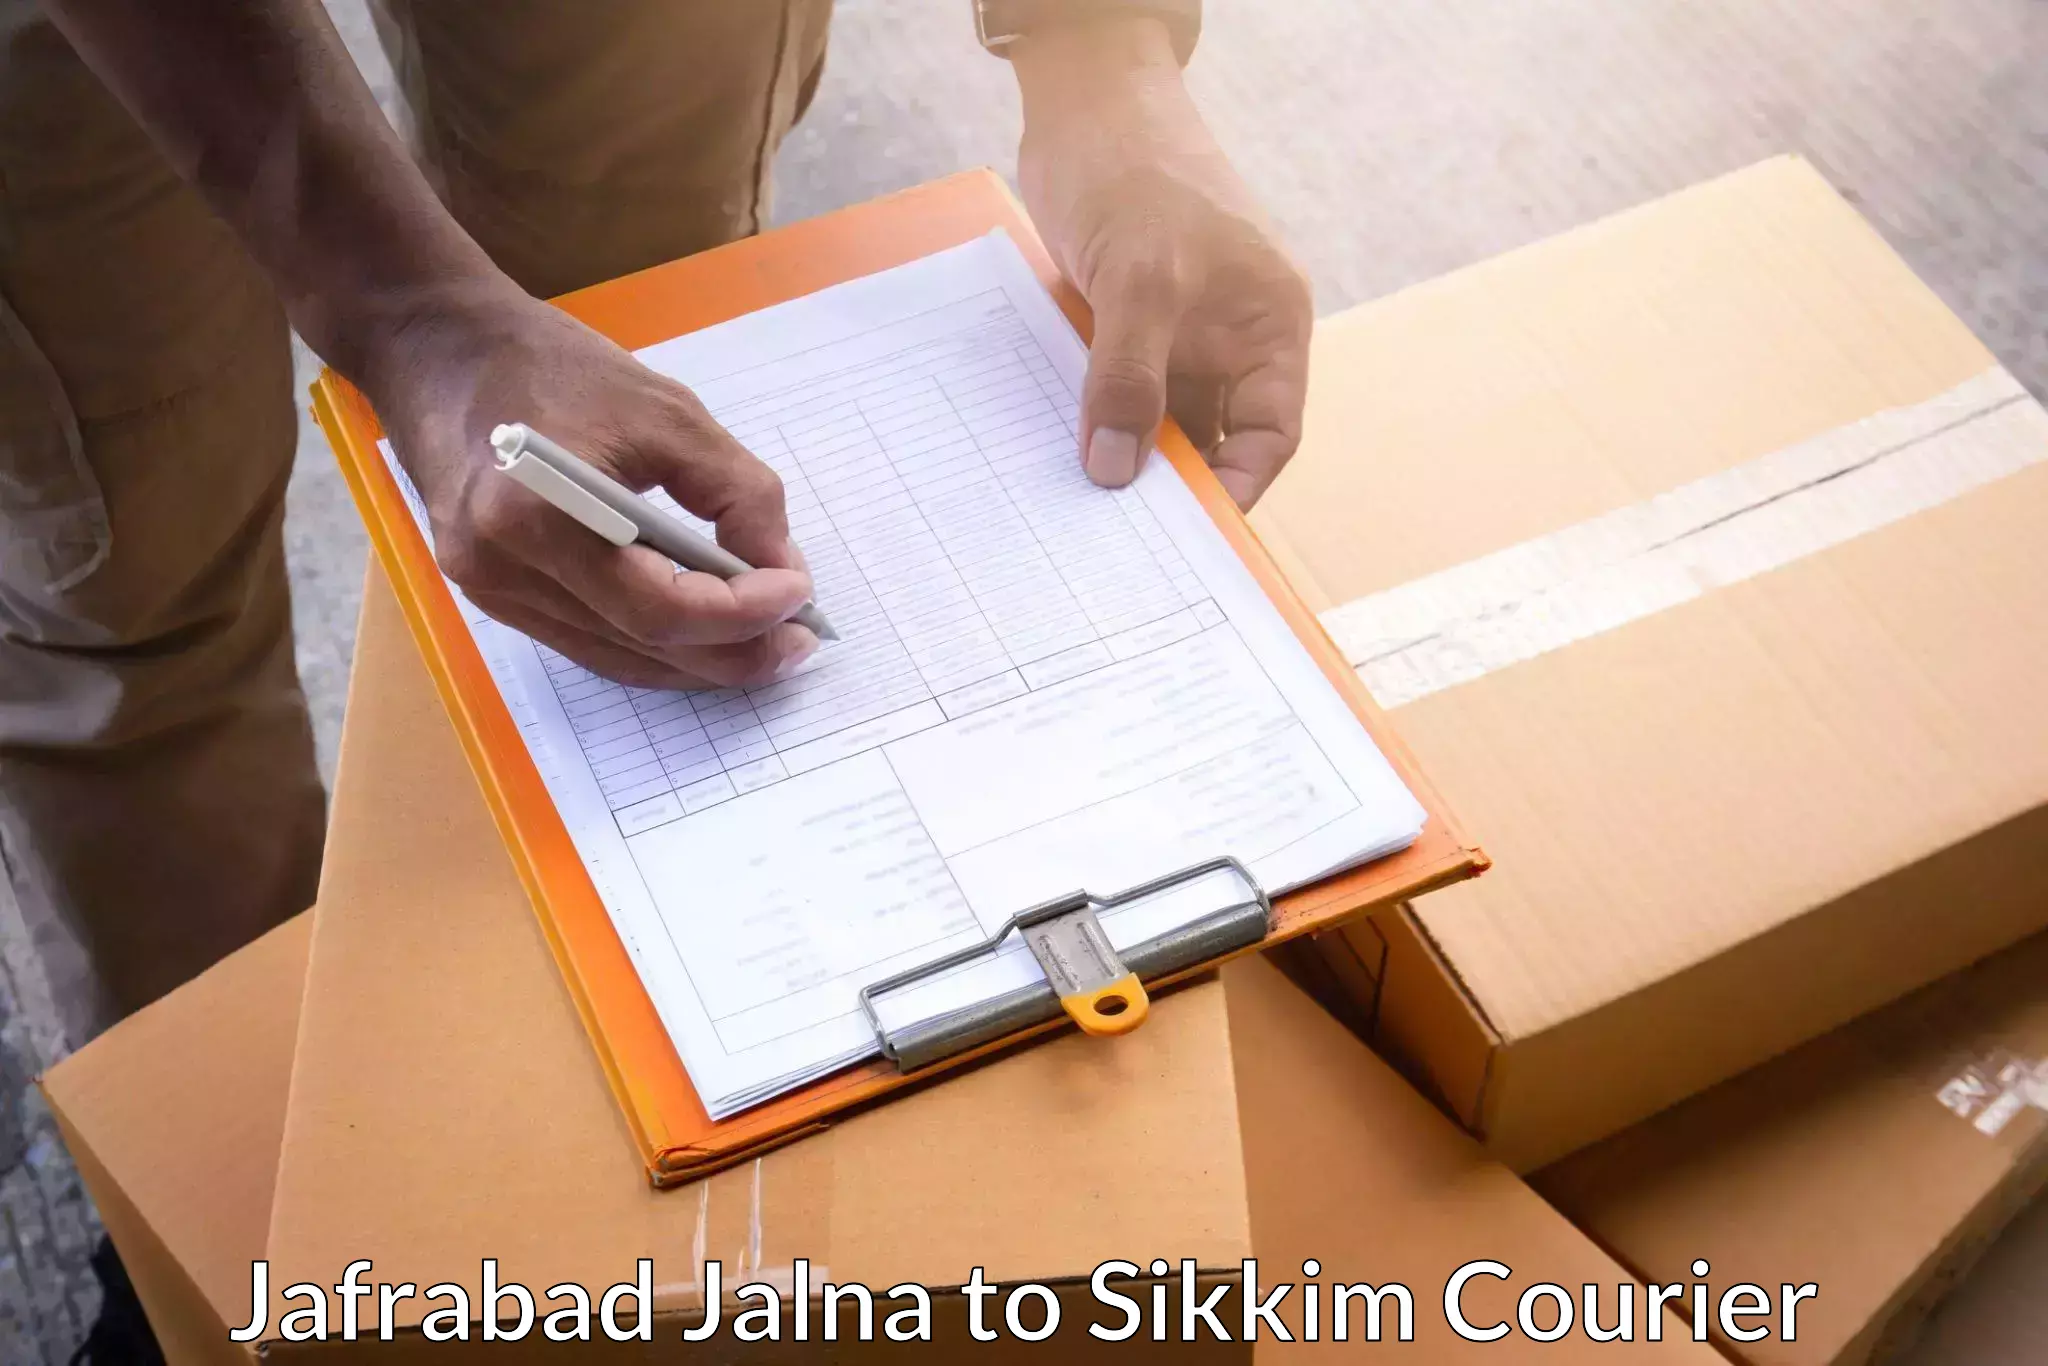 Next-generation courier services Jafrabad Jalna to Rangpo